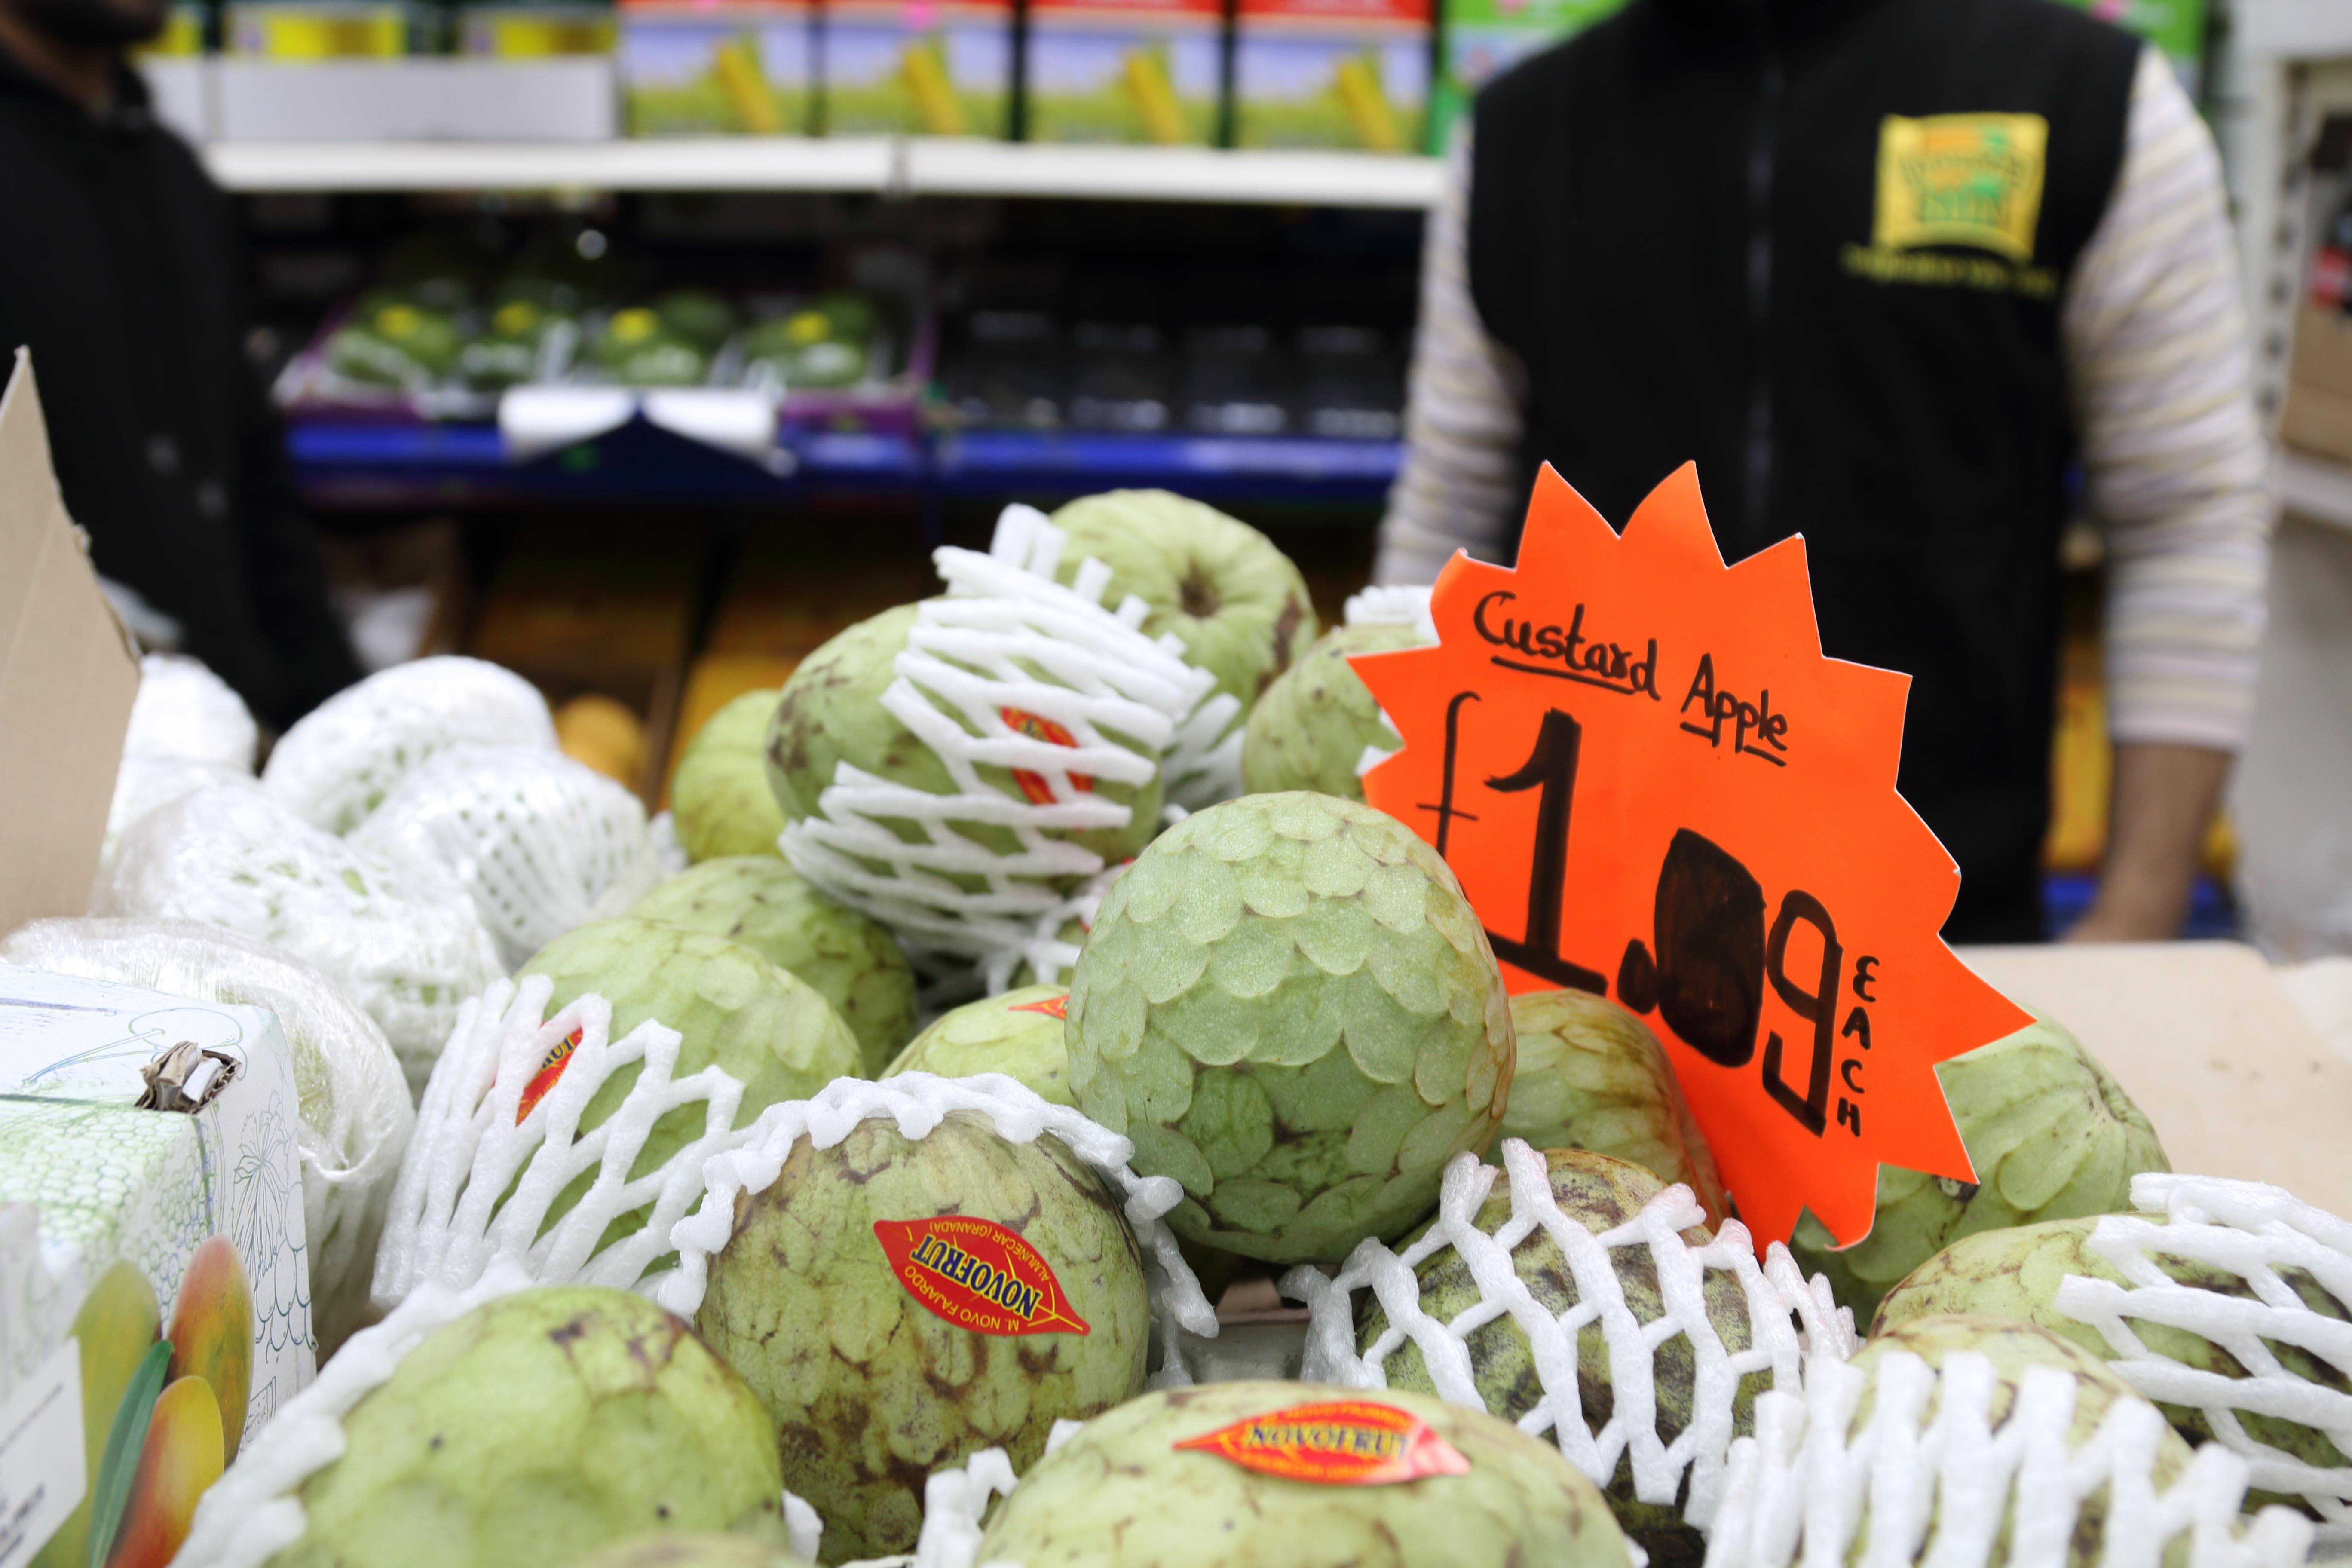 Inside Blue Mountain Peak grocery store, showing Custard Apples, round fruit with irregular green skins, packed in white polystyrene wrappers. A sign on orange card reads, ‘Custard Apple: £1.09 Each”.